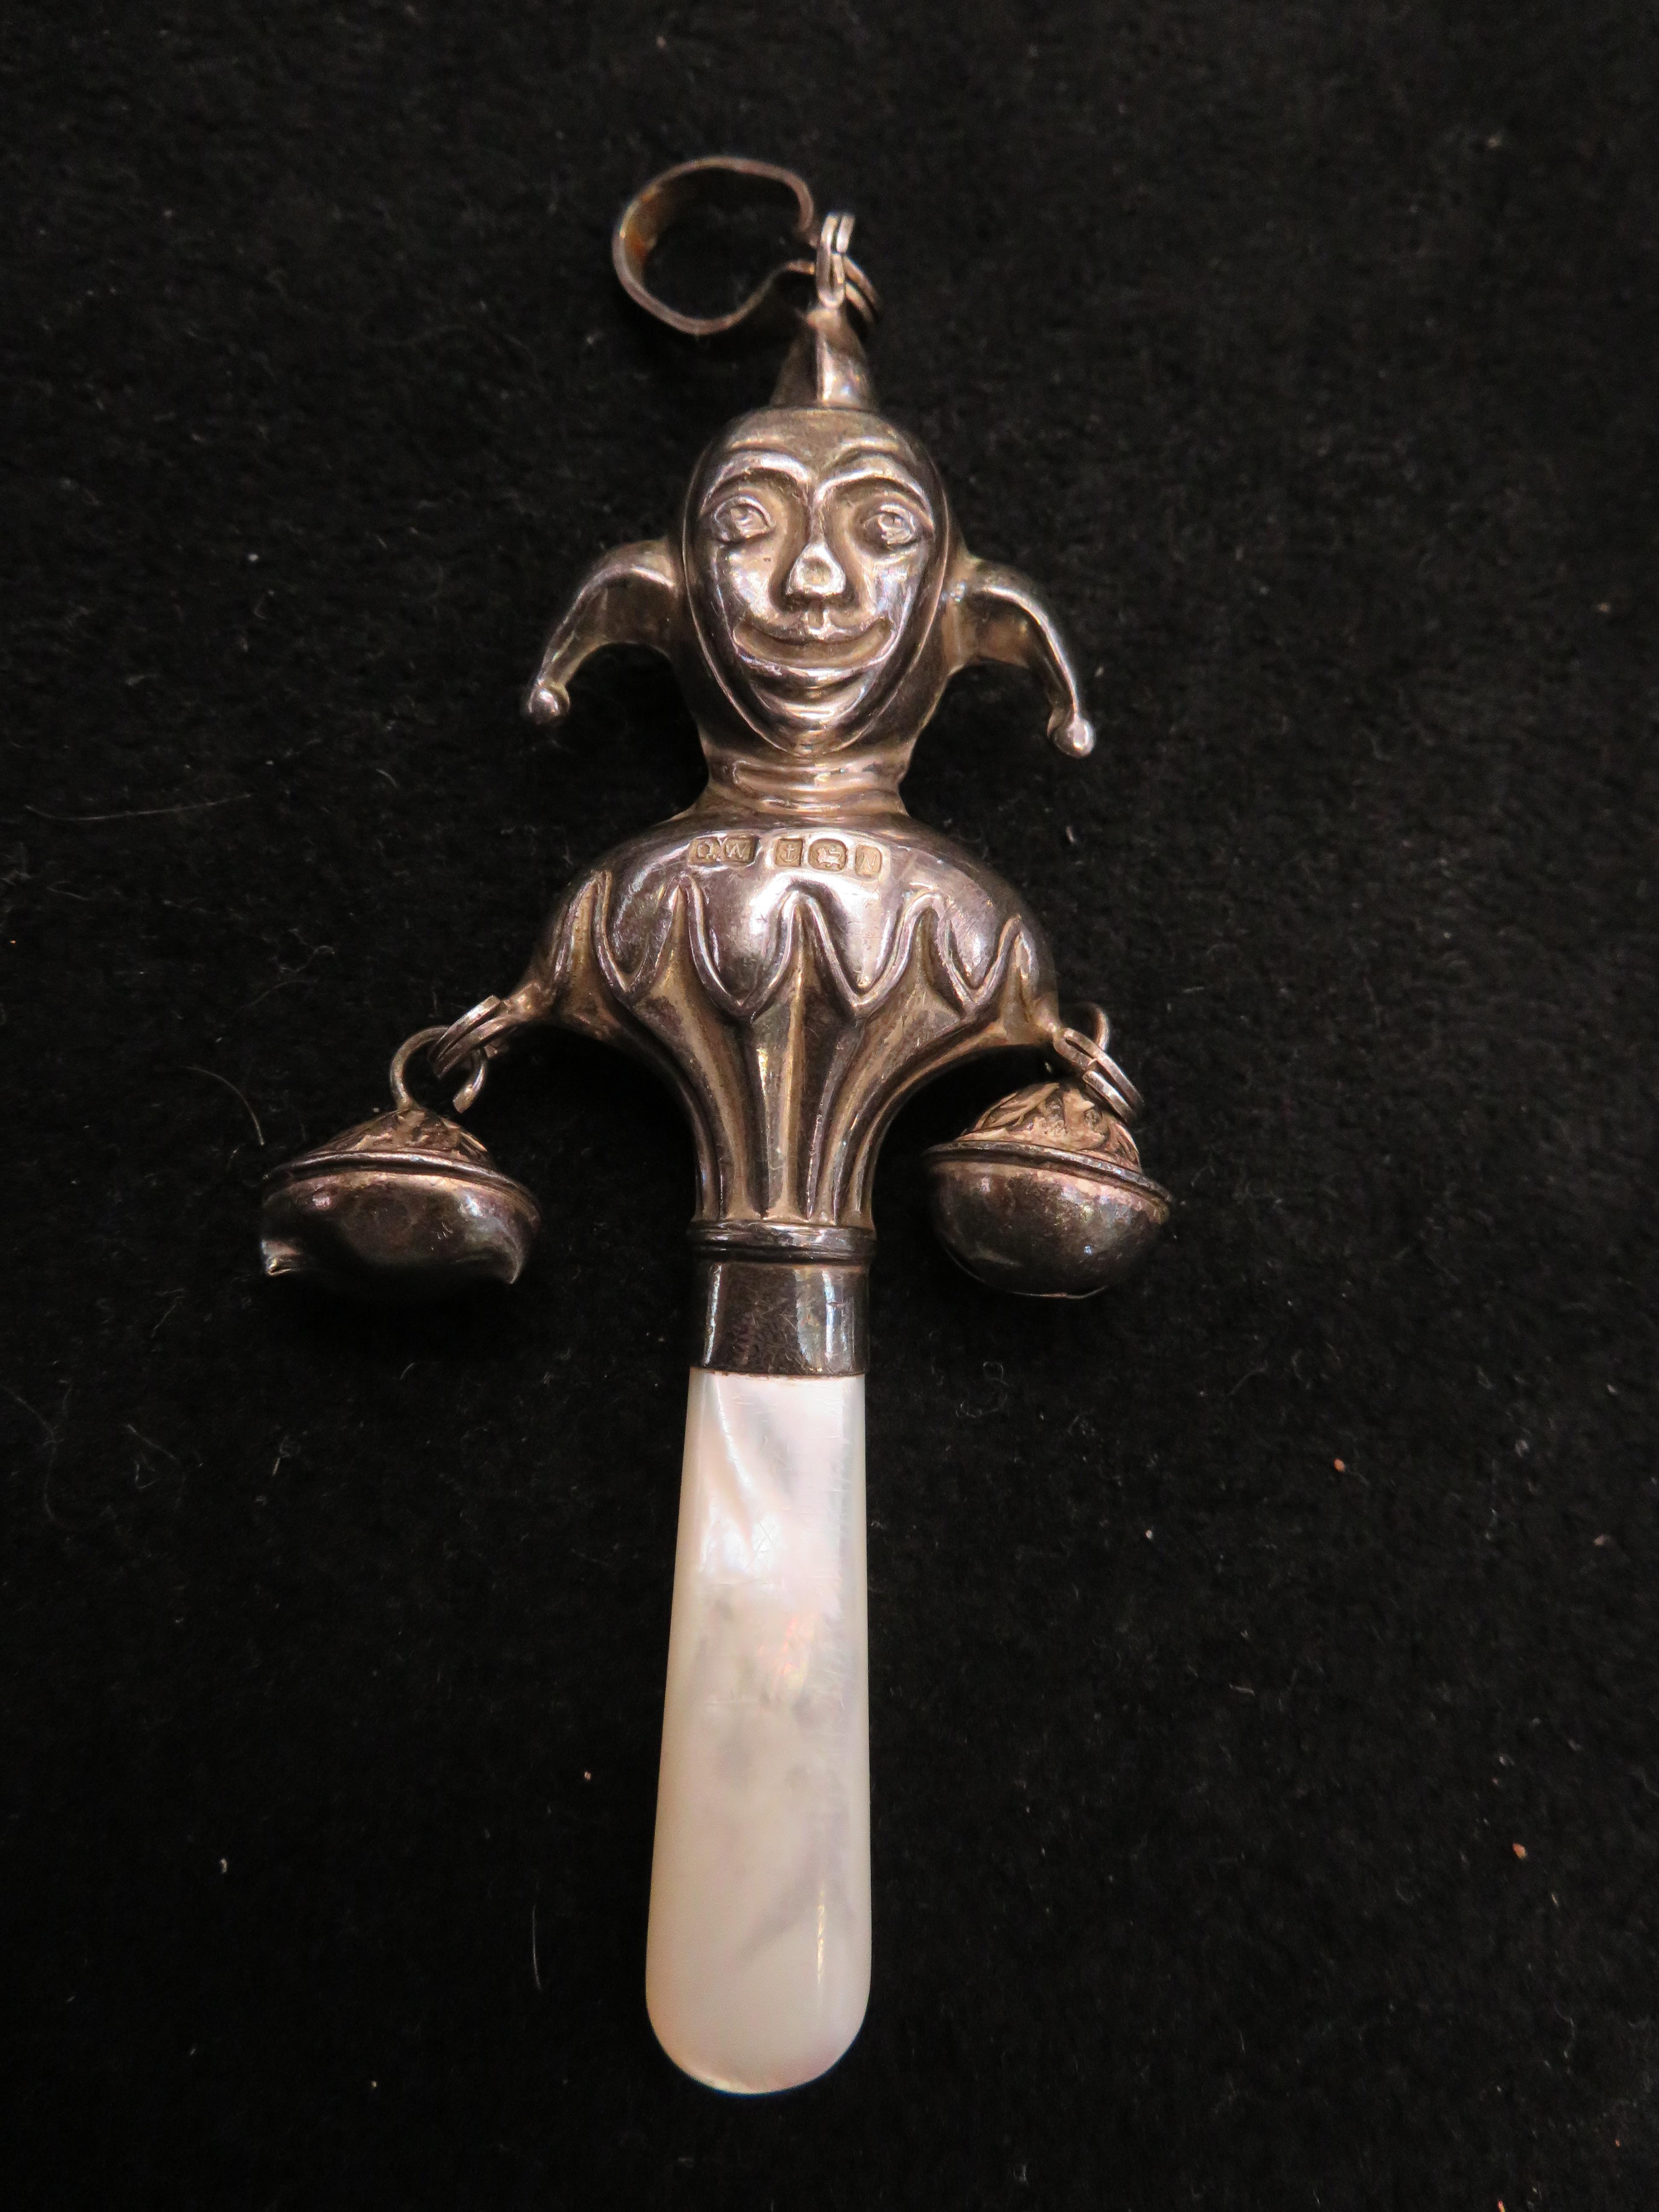 Baby's silver rattle in the form of a jester, with